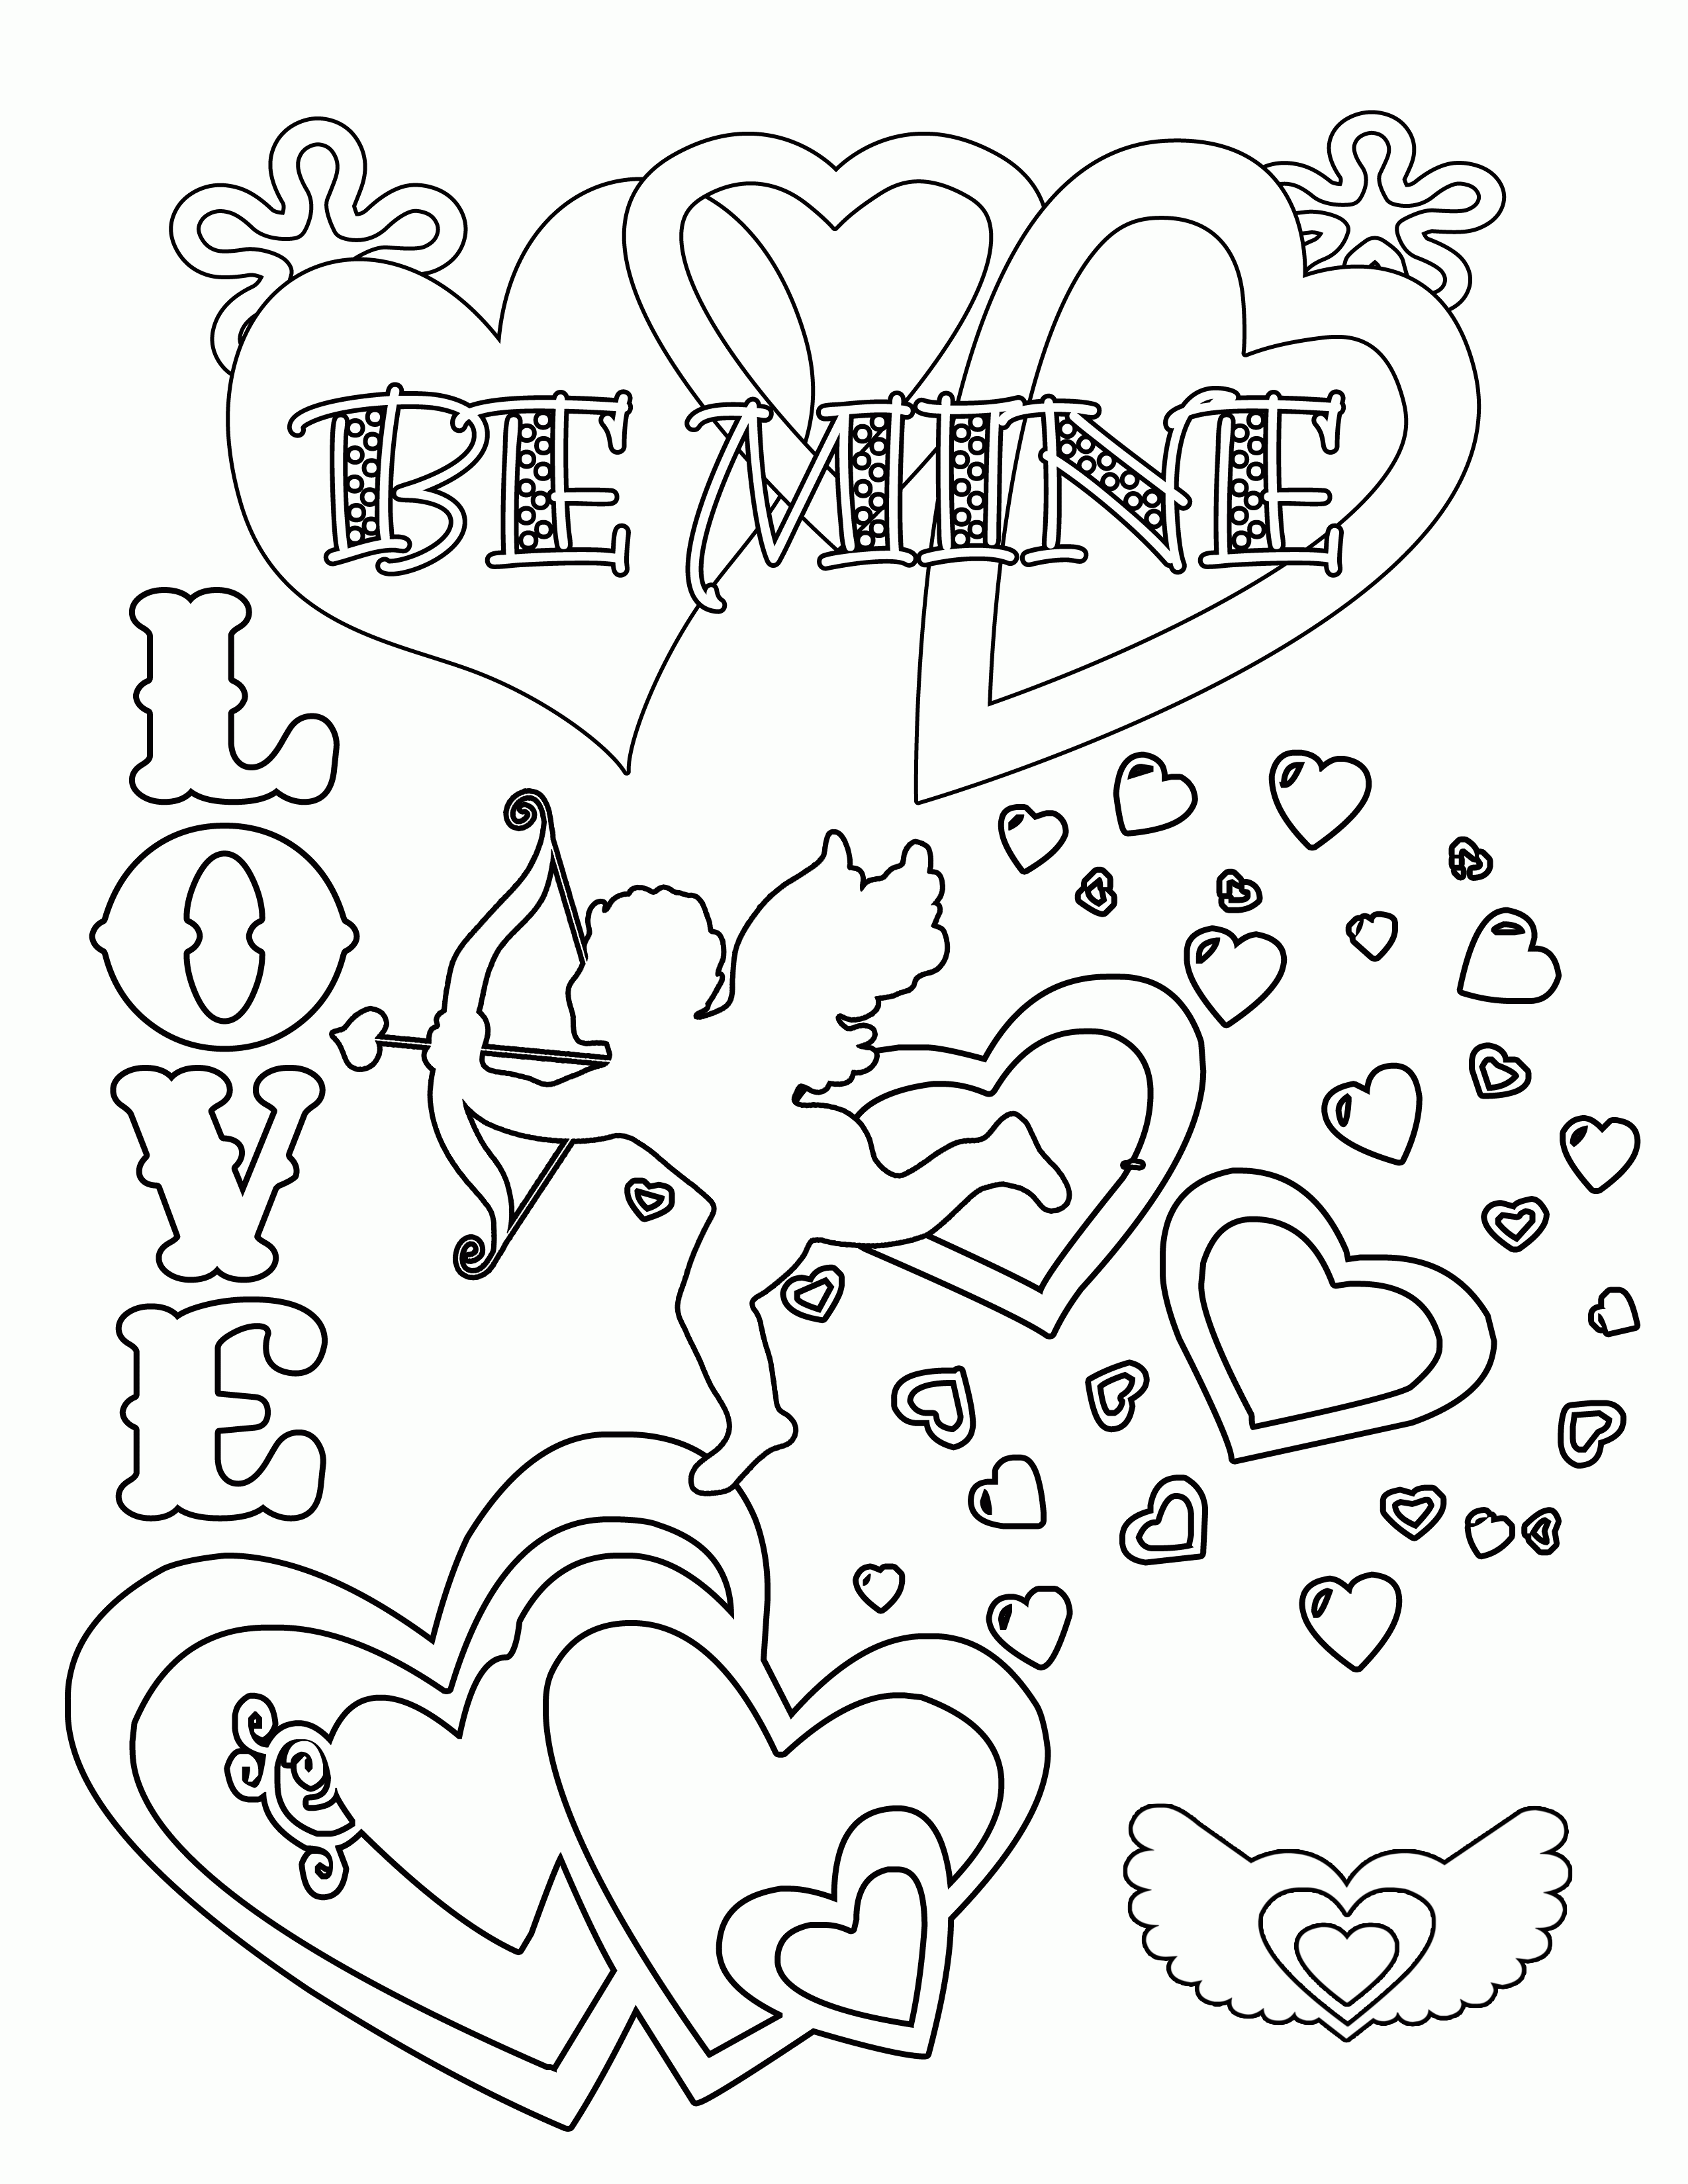 Free Valentines Day Coloring Pages Color By Code Download Free Clip Art Free Clip Art On